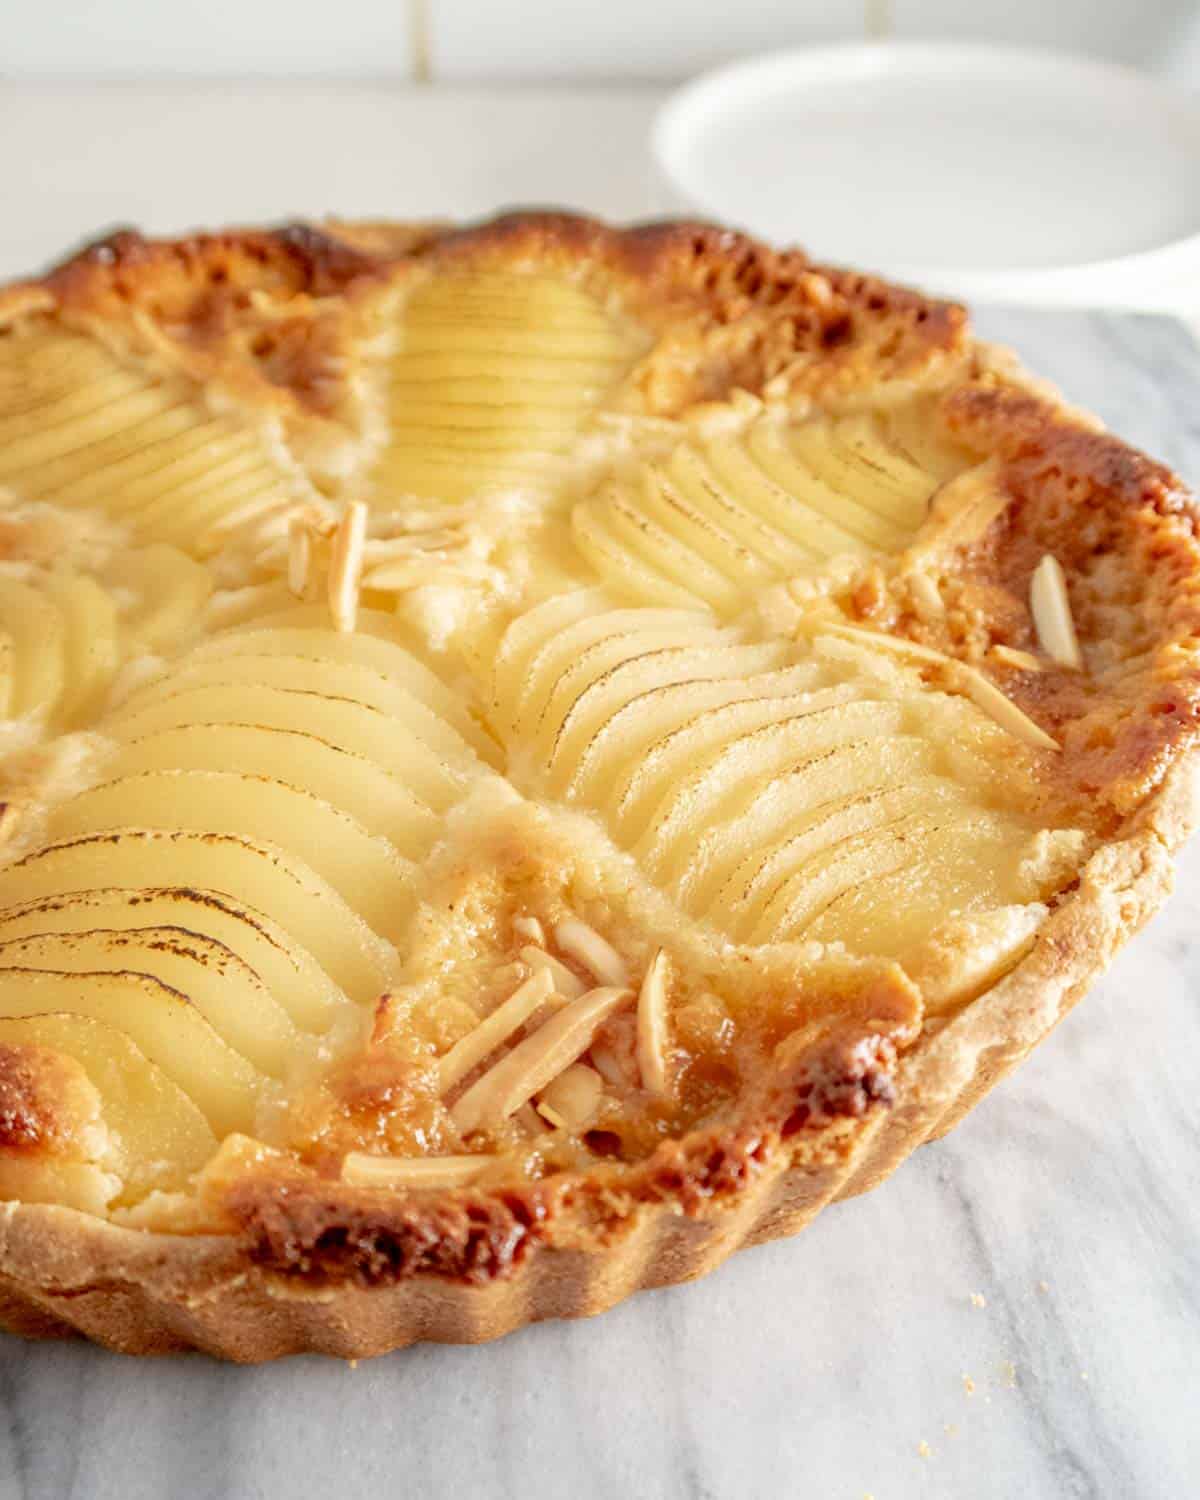 golden baked French tart made with perfectly sliced and arranged pears.